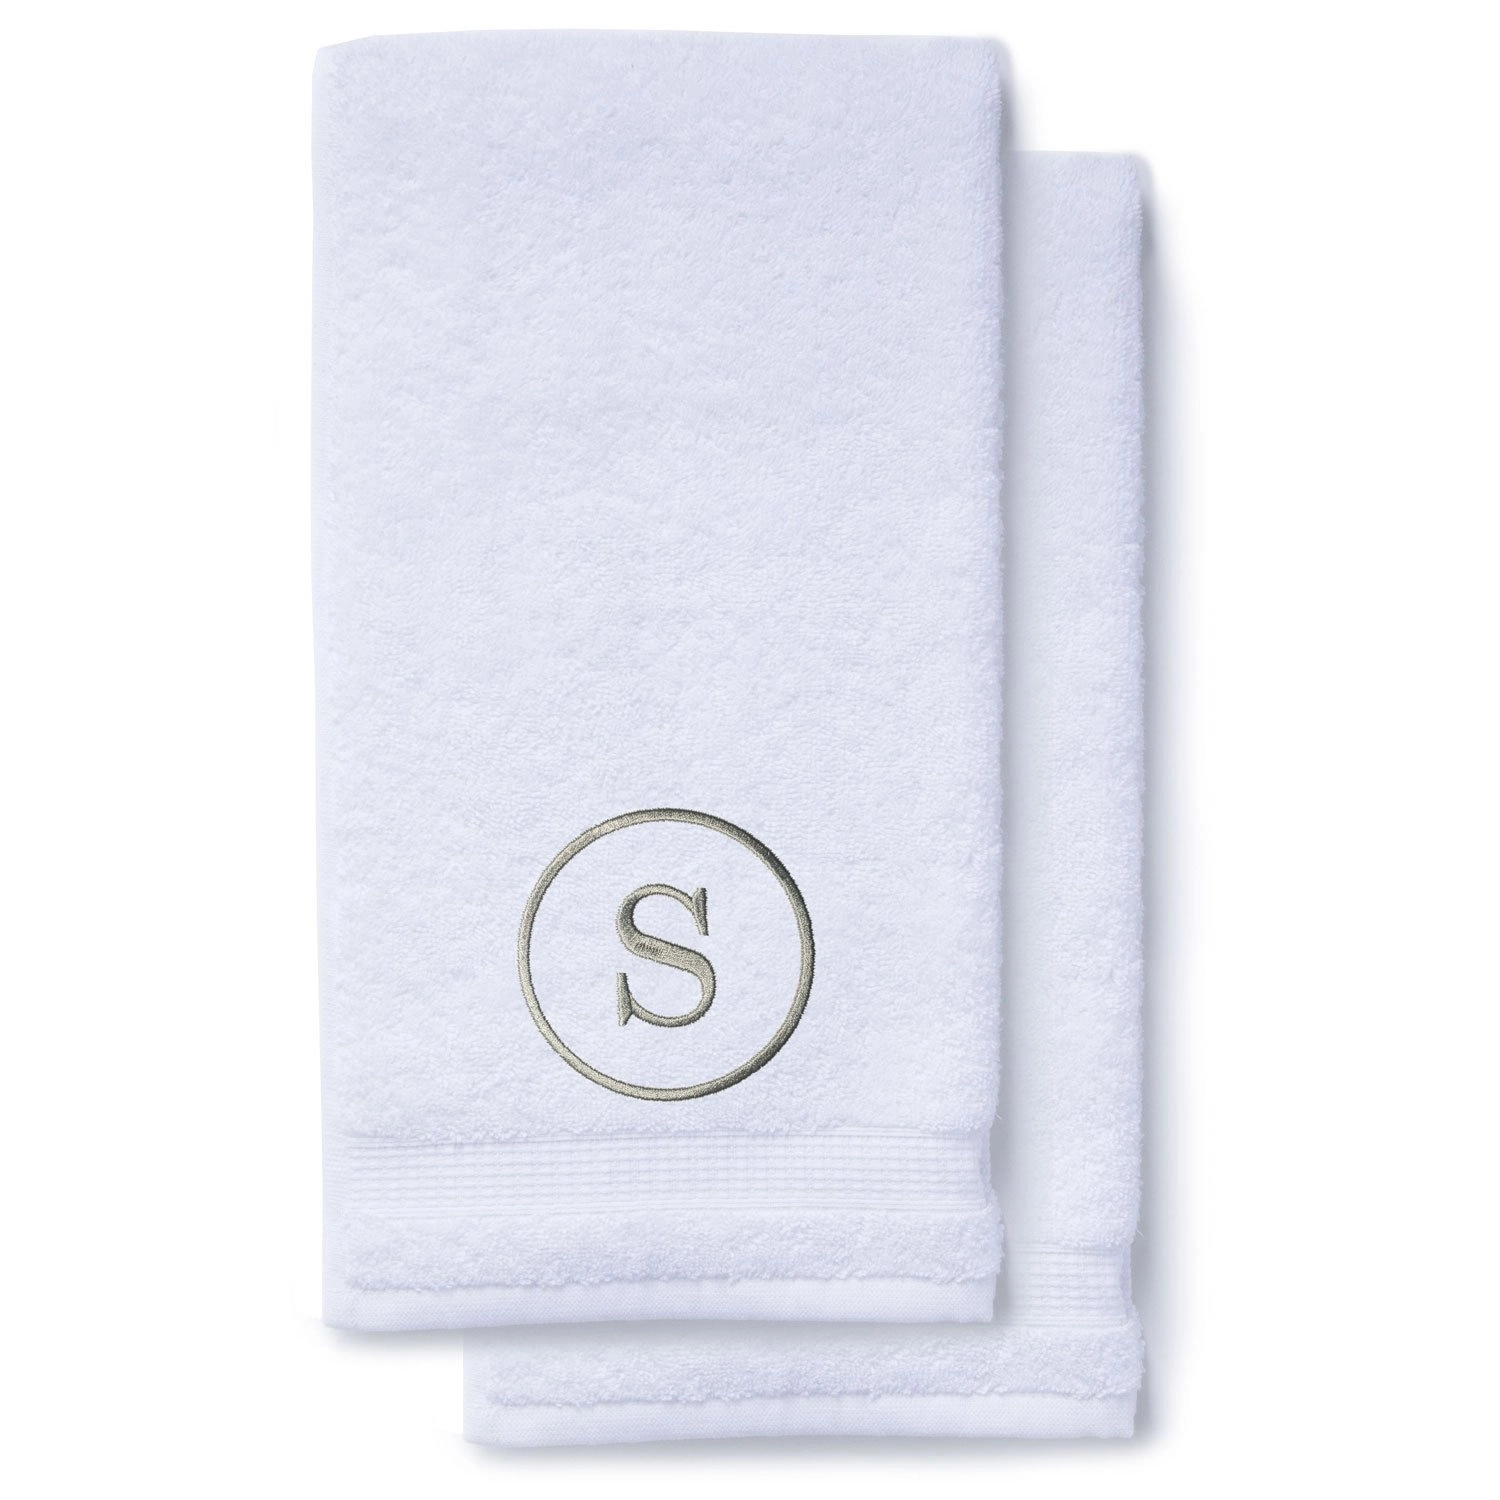 https://robemart.com/images/thumbnails/detailed/7/S-Gray-stacked-Monogrammed-Hand-Towels_phnz-im.webp